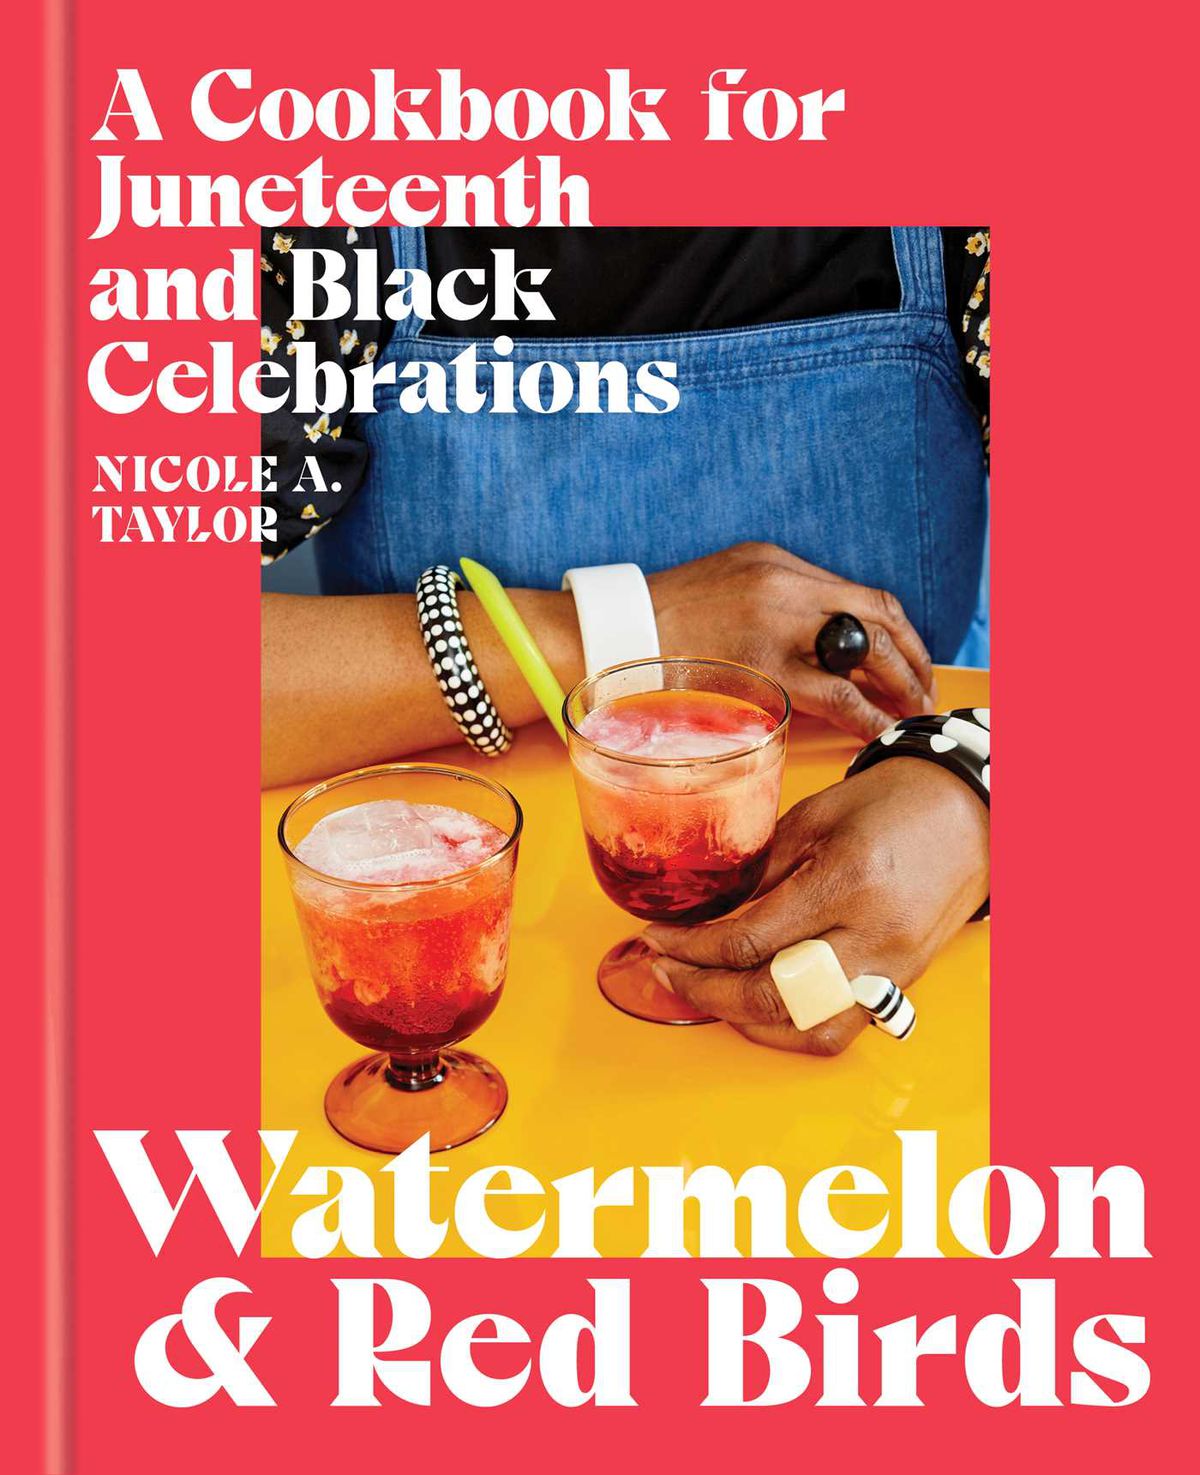 A red book cover with two red drinks, one held by a person clad in a denim top and bold jewelry.